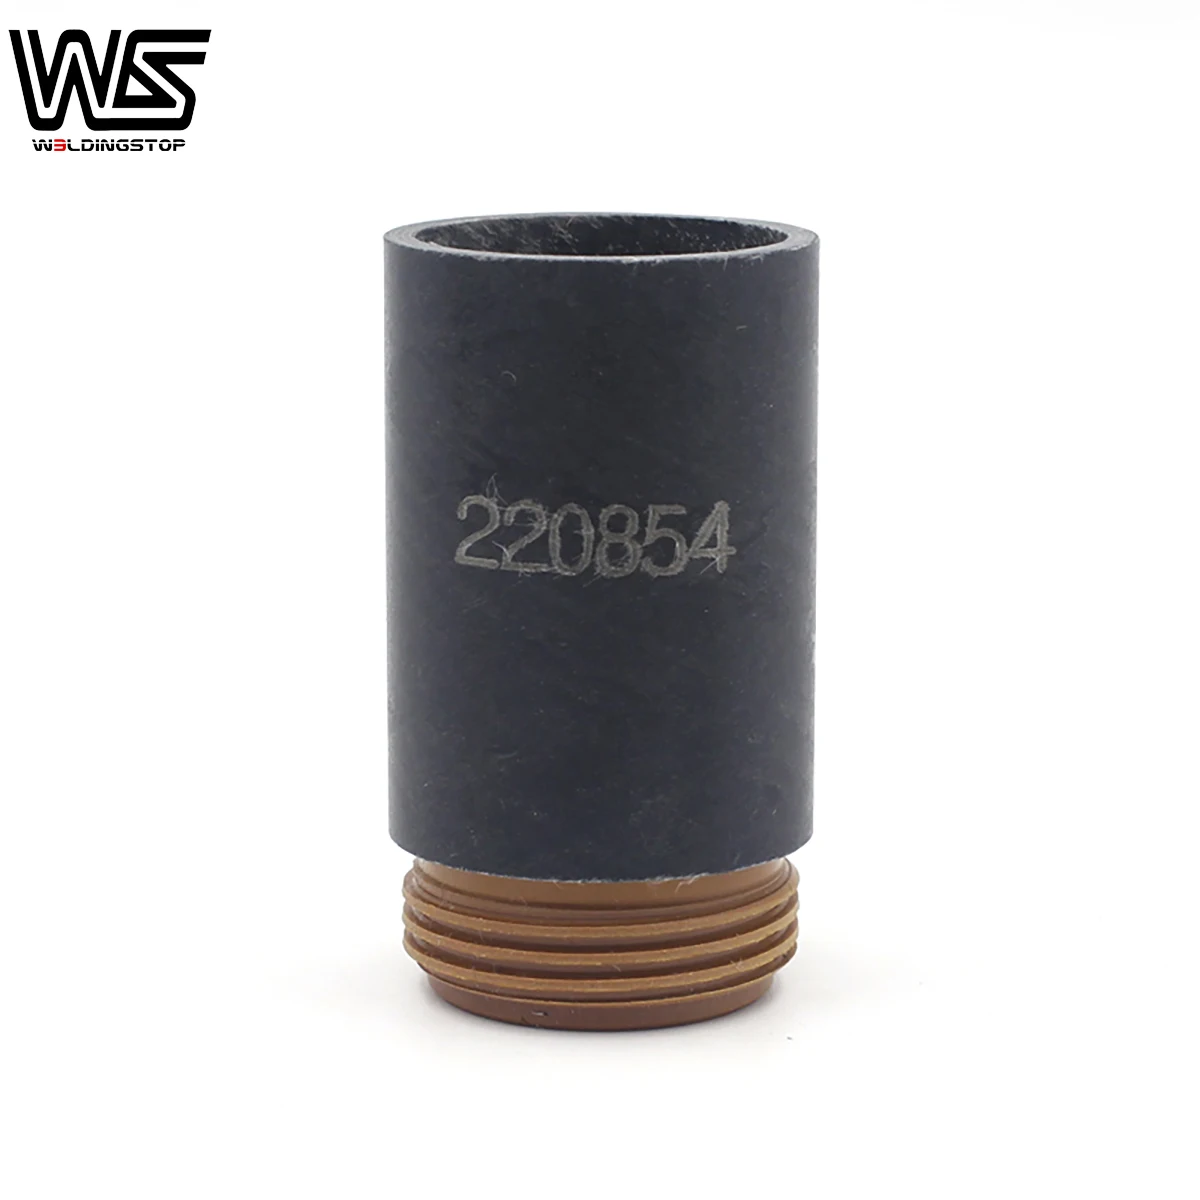 W.S  220854 retaining cap fits in 65/85/105 air plasma Cutting Torch Consumables aftermarket replacement